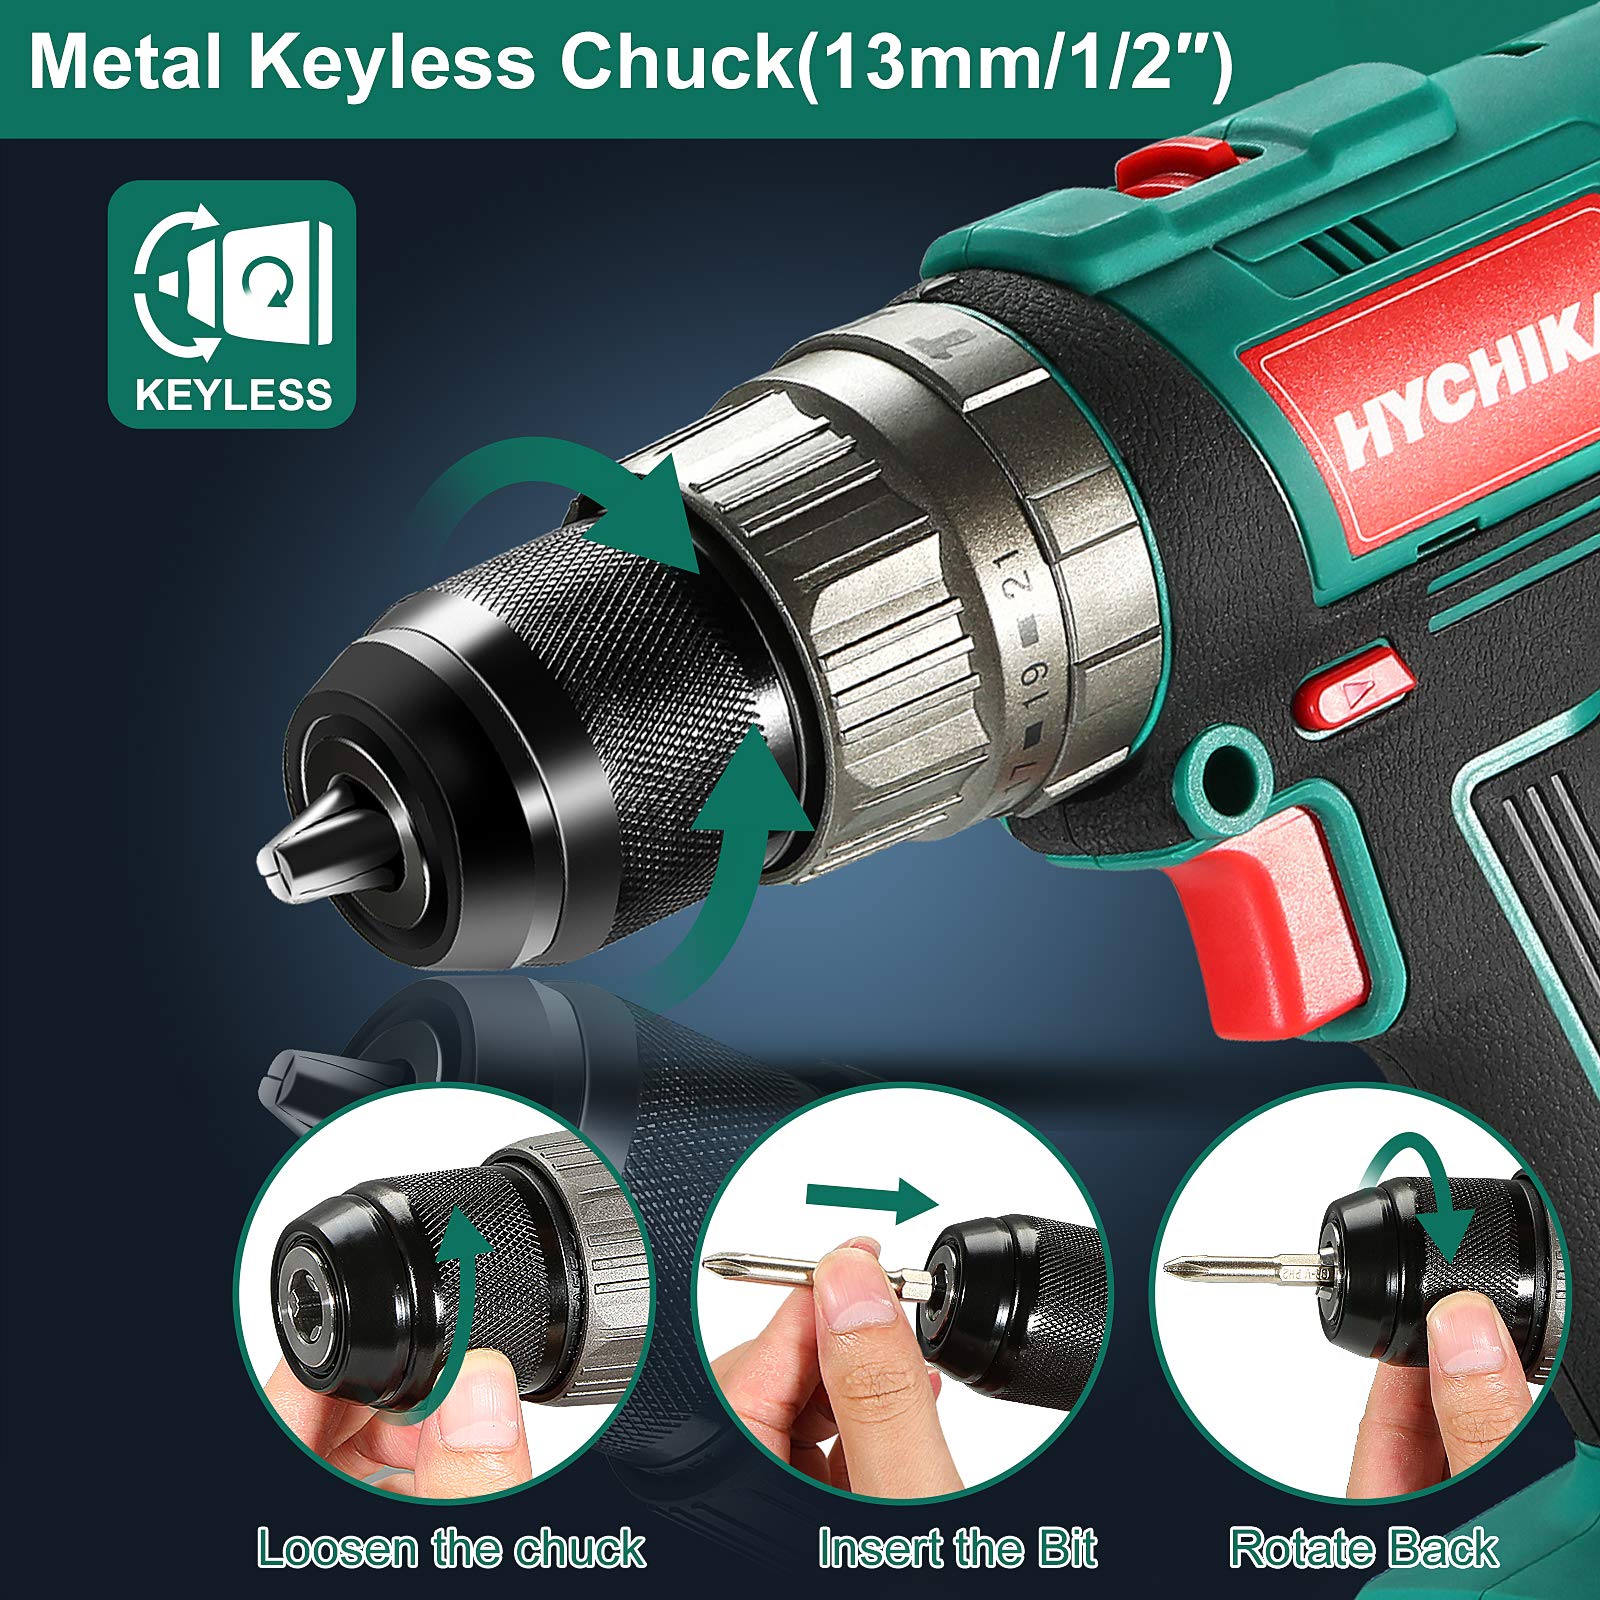 Cordless Hammer Drill Driver 18V, HYCHIKA 400 In-lbs Torque Power Drill with Auxiliary Handle, 1/2” Metal Chuck, 2.0Ah Battery, 1H Fast Charger, 21+3 Clutch, LED Light for Drilling Wood Metal Wall